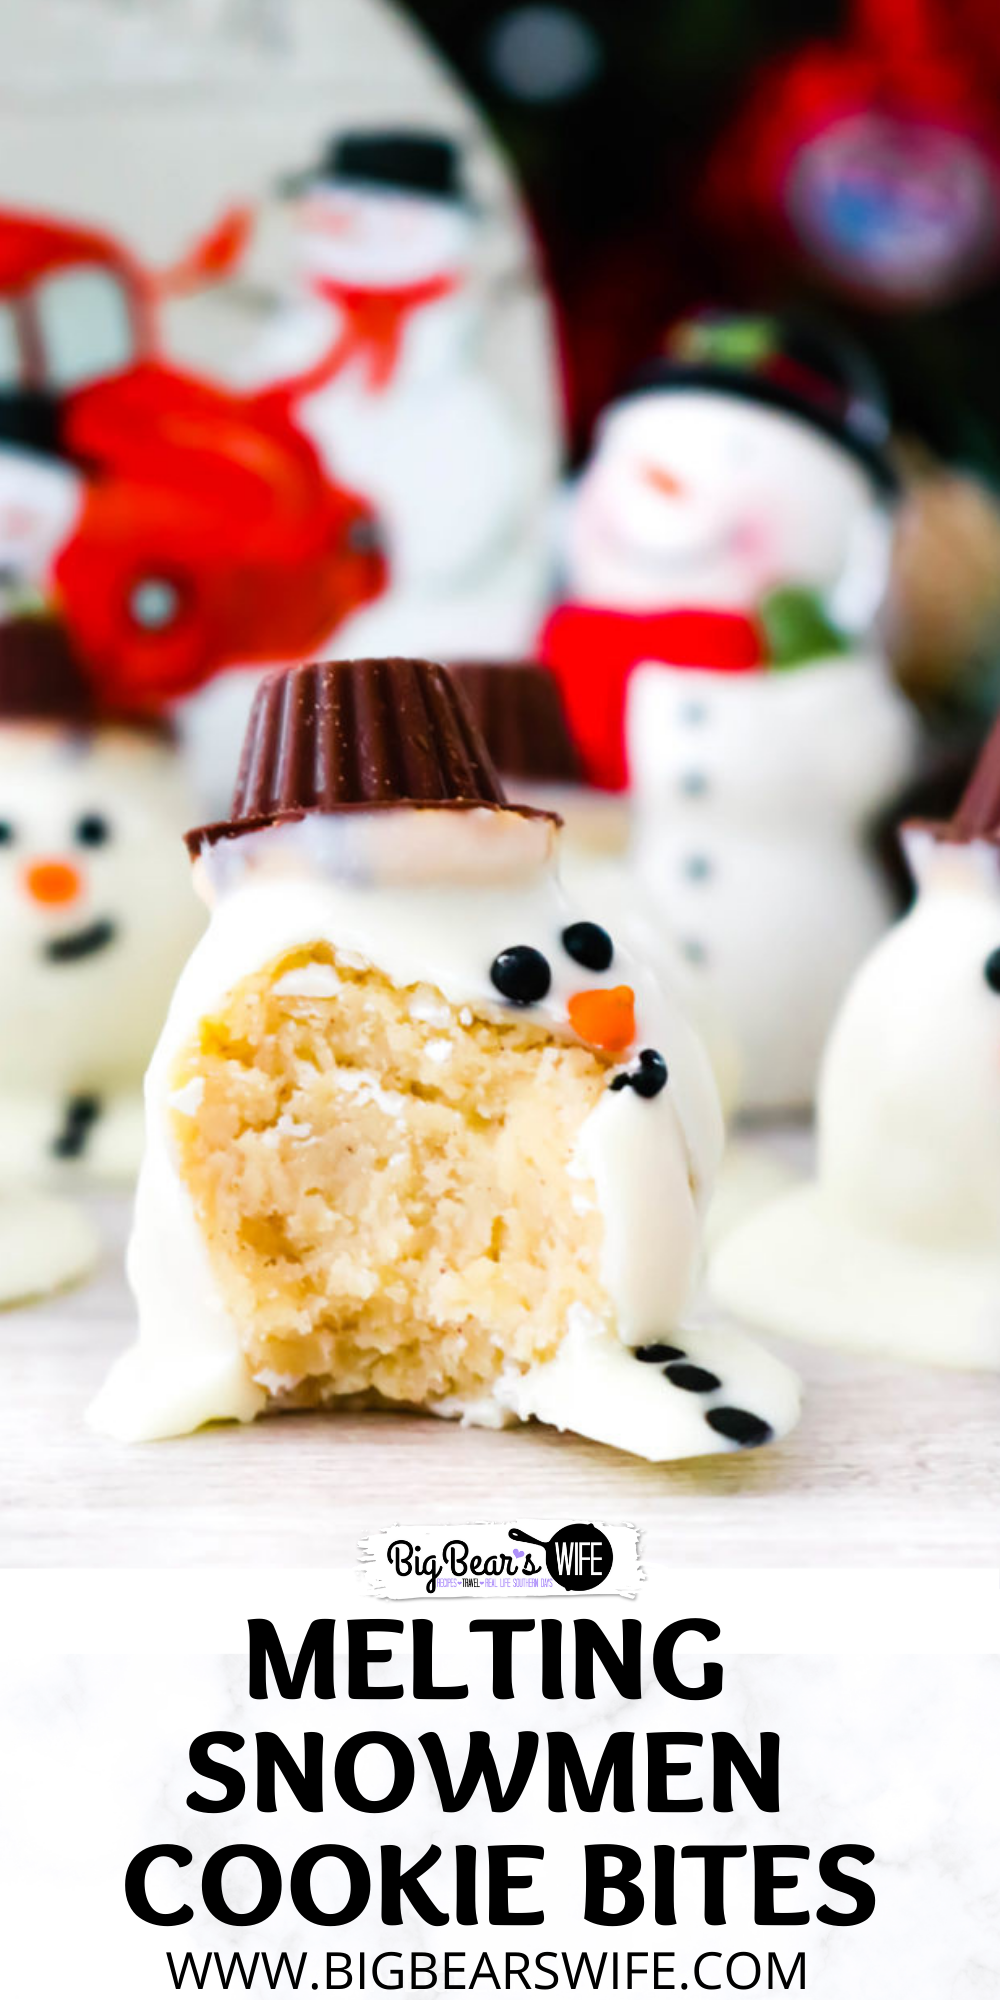 This adorable dessert is actually homemade snickerdoodles rolled into balls and coated with white chocolate to look like a cute melting snowman. Get the kids involved with this one. This easy recipe can be mastered by chefs of all ages. One part cookie, one part candy, and one part edible art! Melting Snowmen Cookie Bites are sure to be a hit at your holiday parties and winter get-togethers! via @bigbearswife